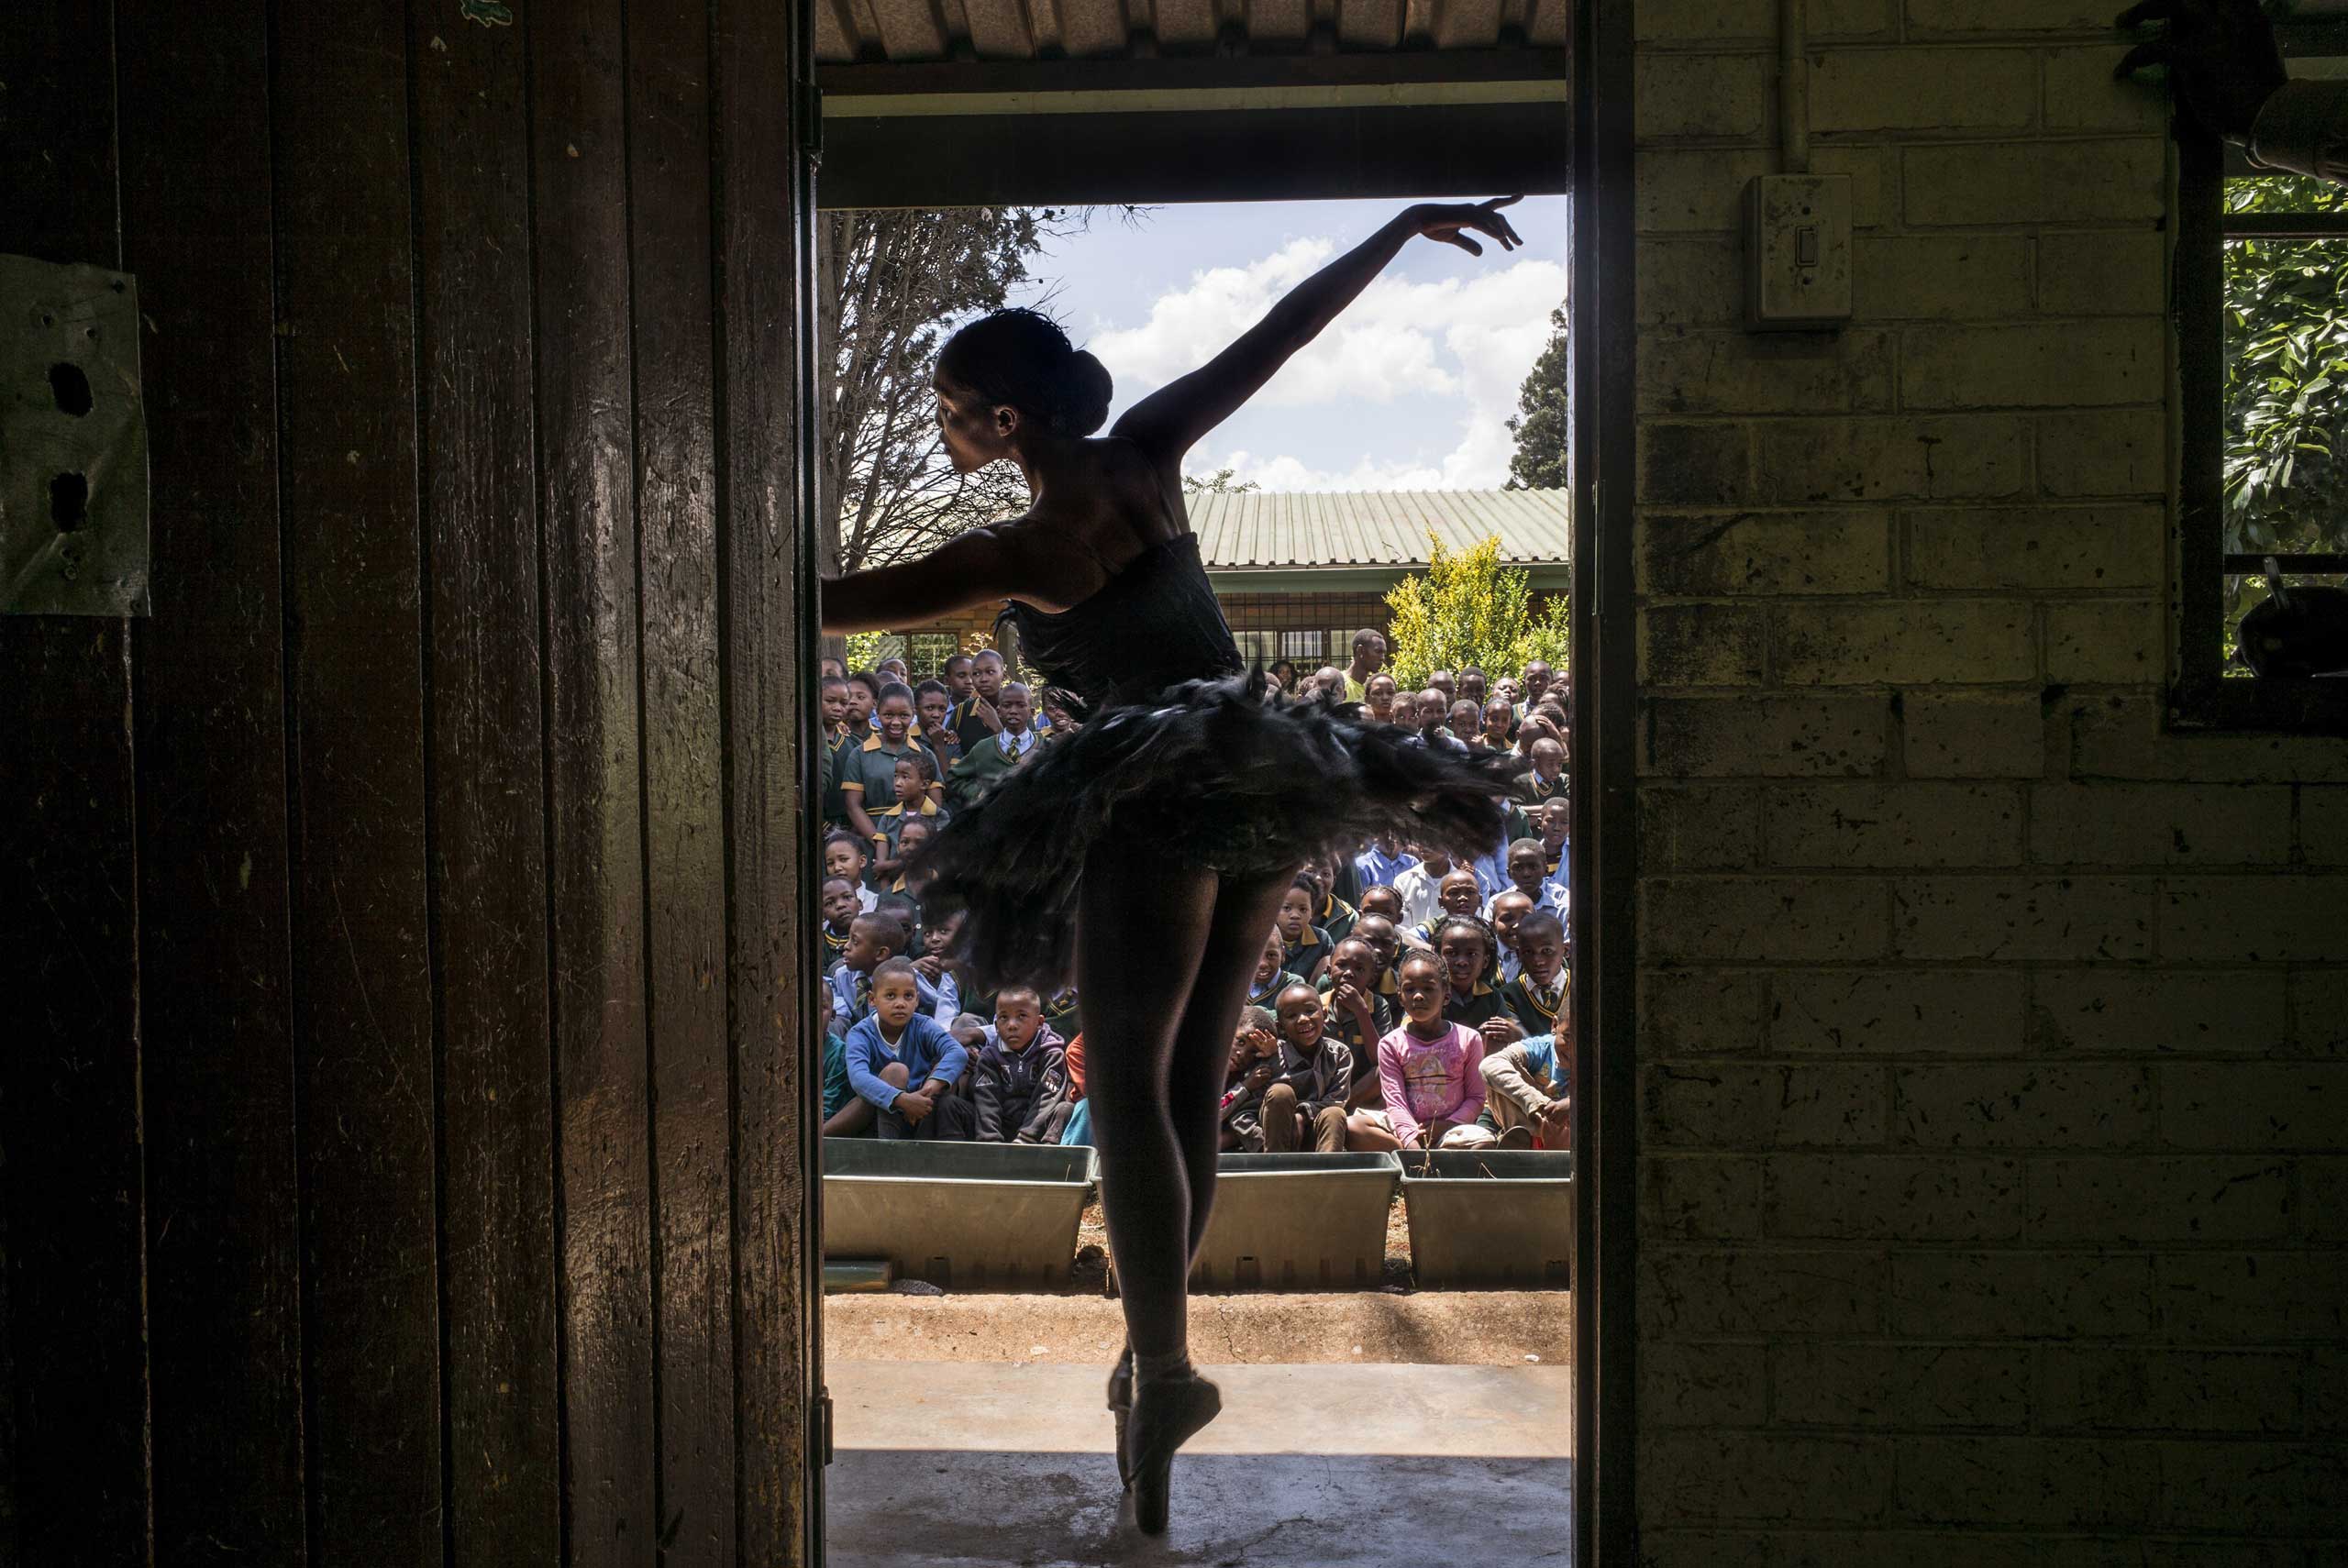 The Wall Street Journal: Photos of the Year 2014Senior soloist of the Joburg Ballet Kitty Phetla performs in a classroom at the Nka-Thuto Primary School in Soweto on Oct. 16, 2014.